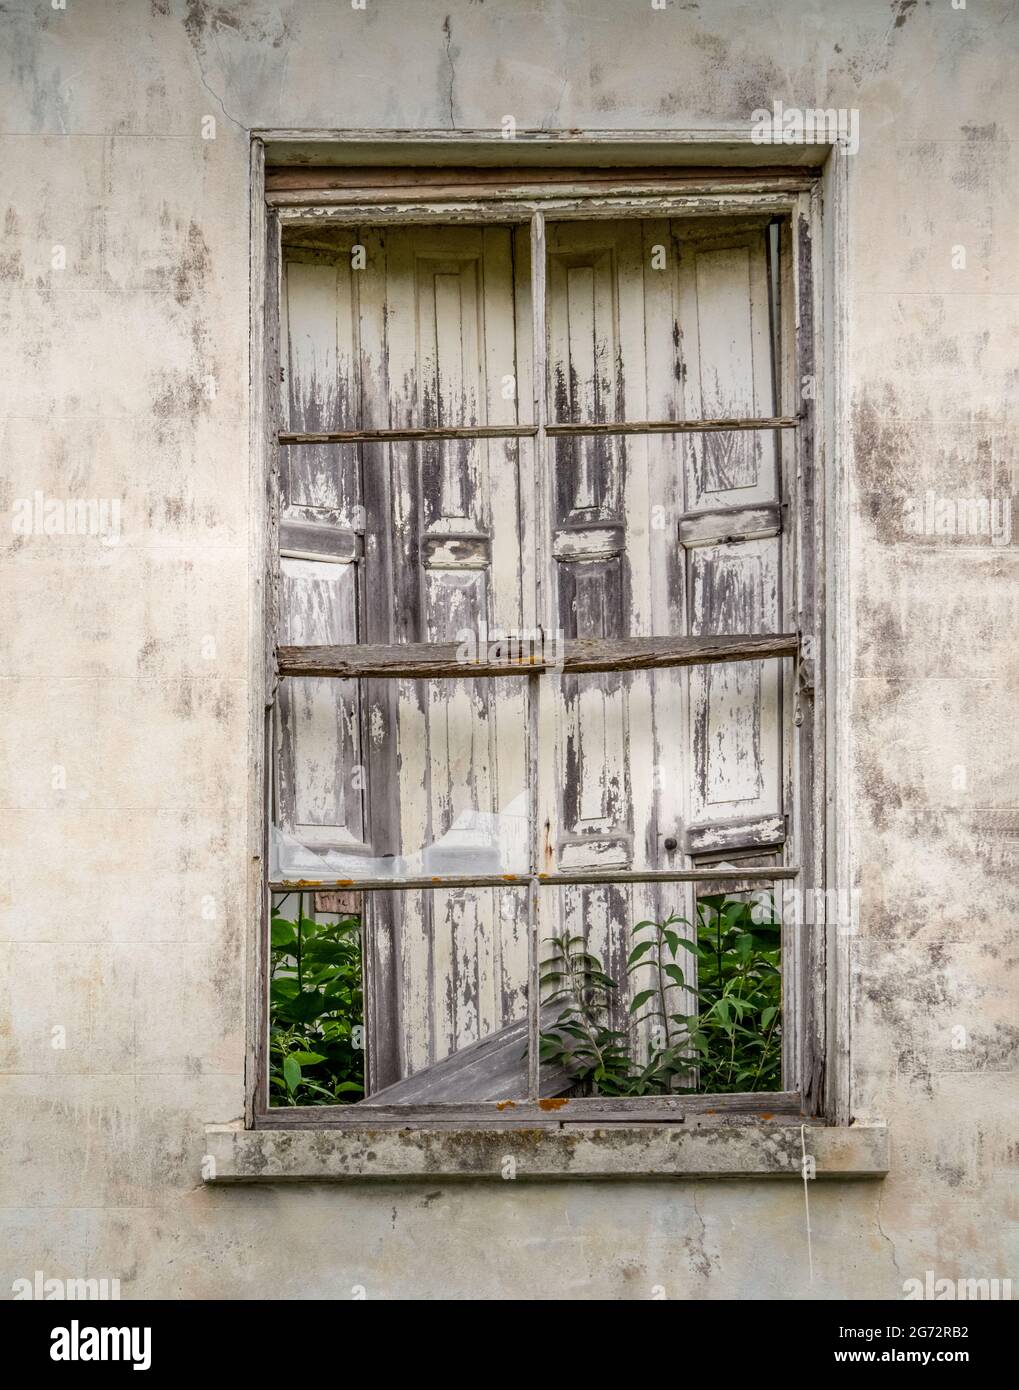 Old window, no glass, broken wooden shutters in dirty, neglected white wall. Stock Photo